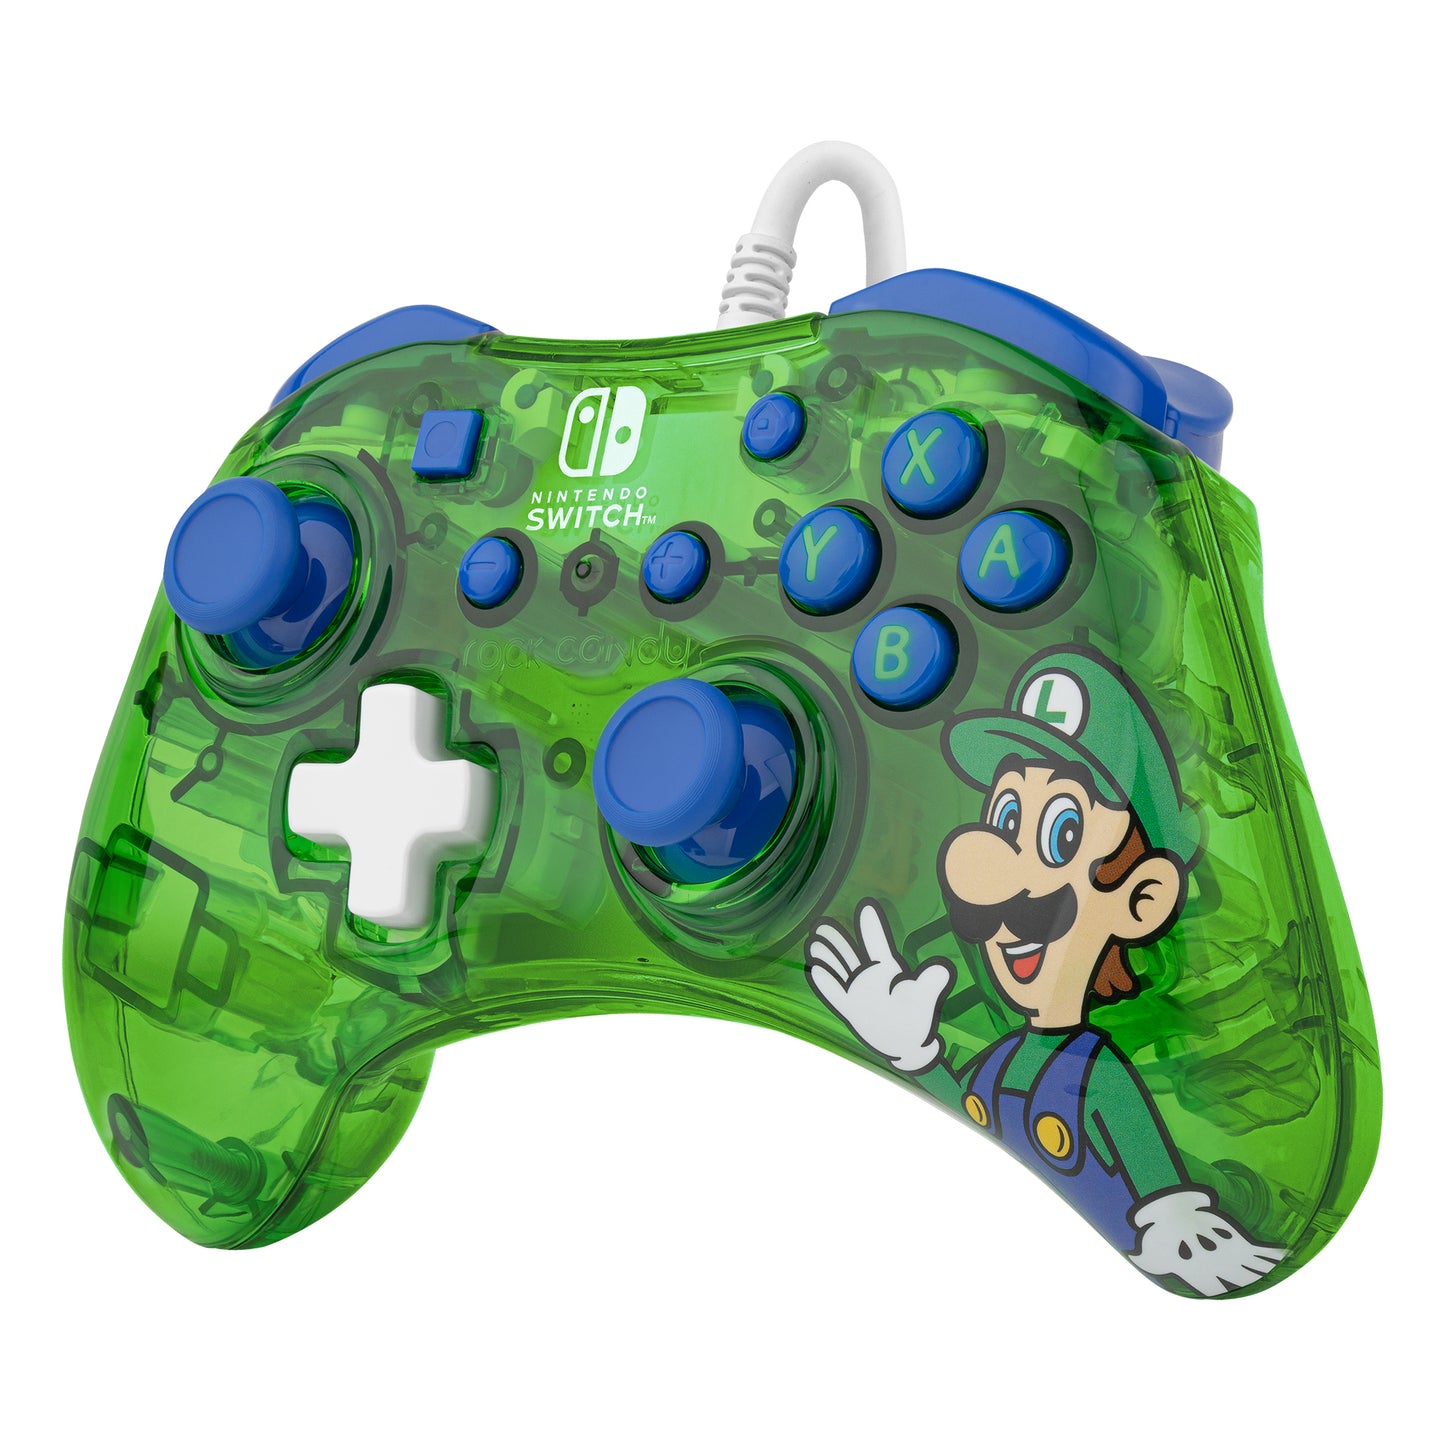 ROCK CANDY WIRED CTRL LUIGI WRLS NINTENDO SWITCH - X-CUSTOMER NOT AUTHORIZED for IPN/VPN Number: H31000D